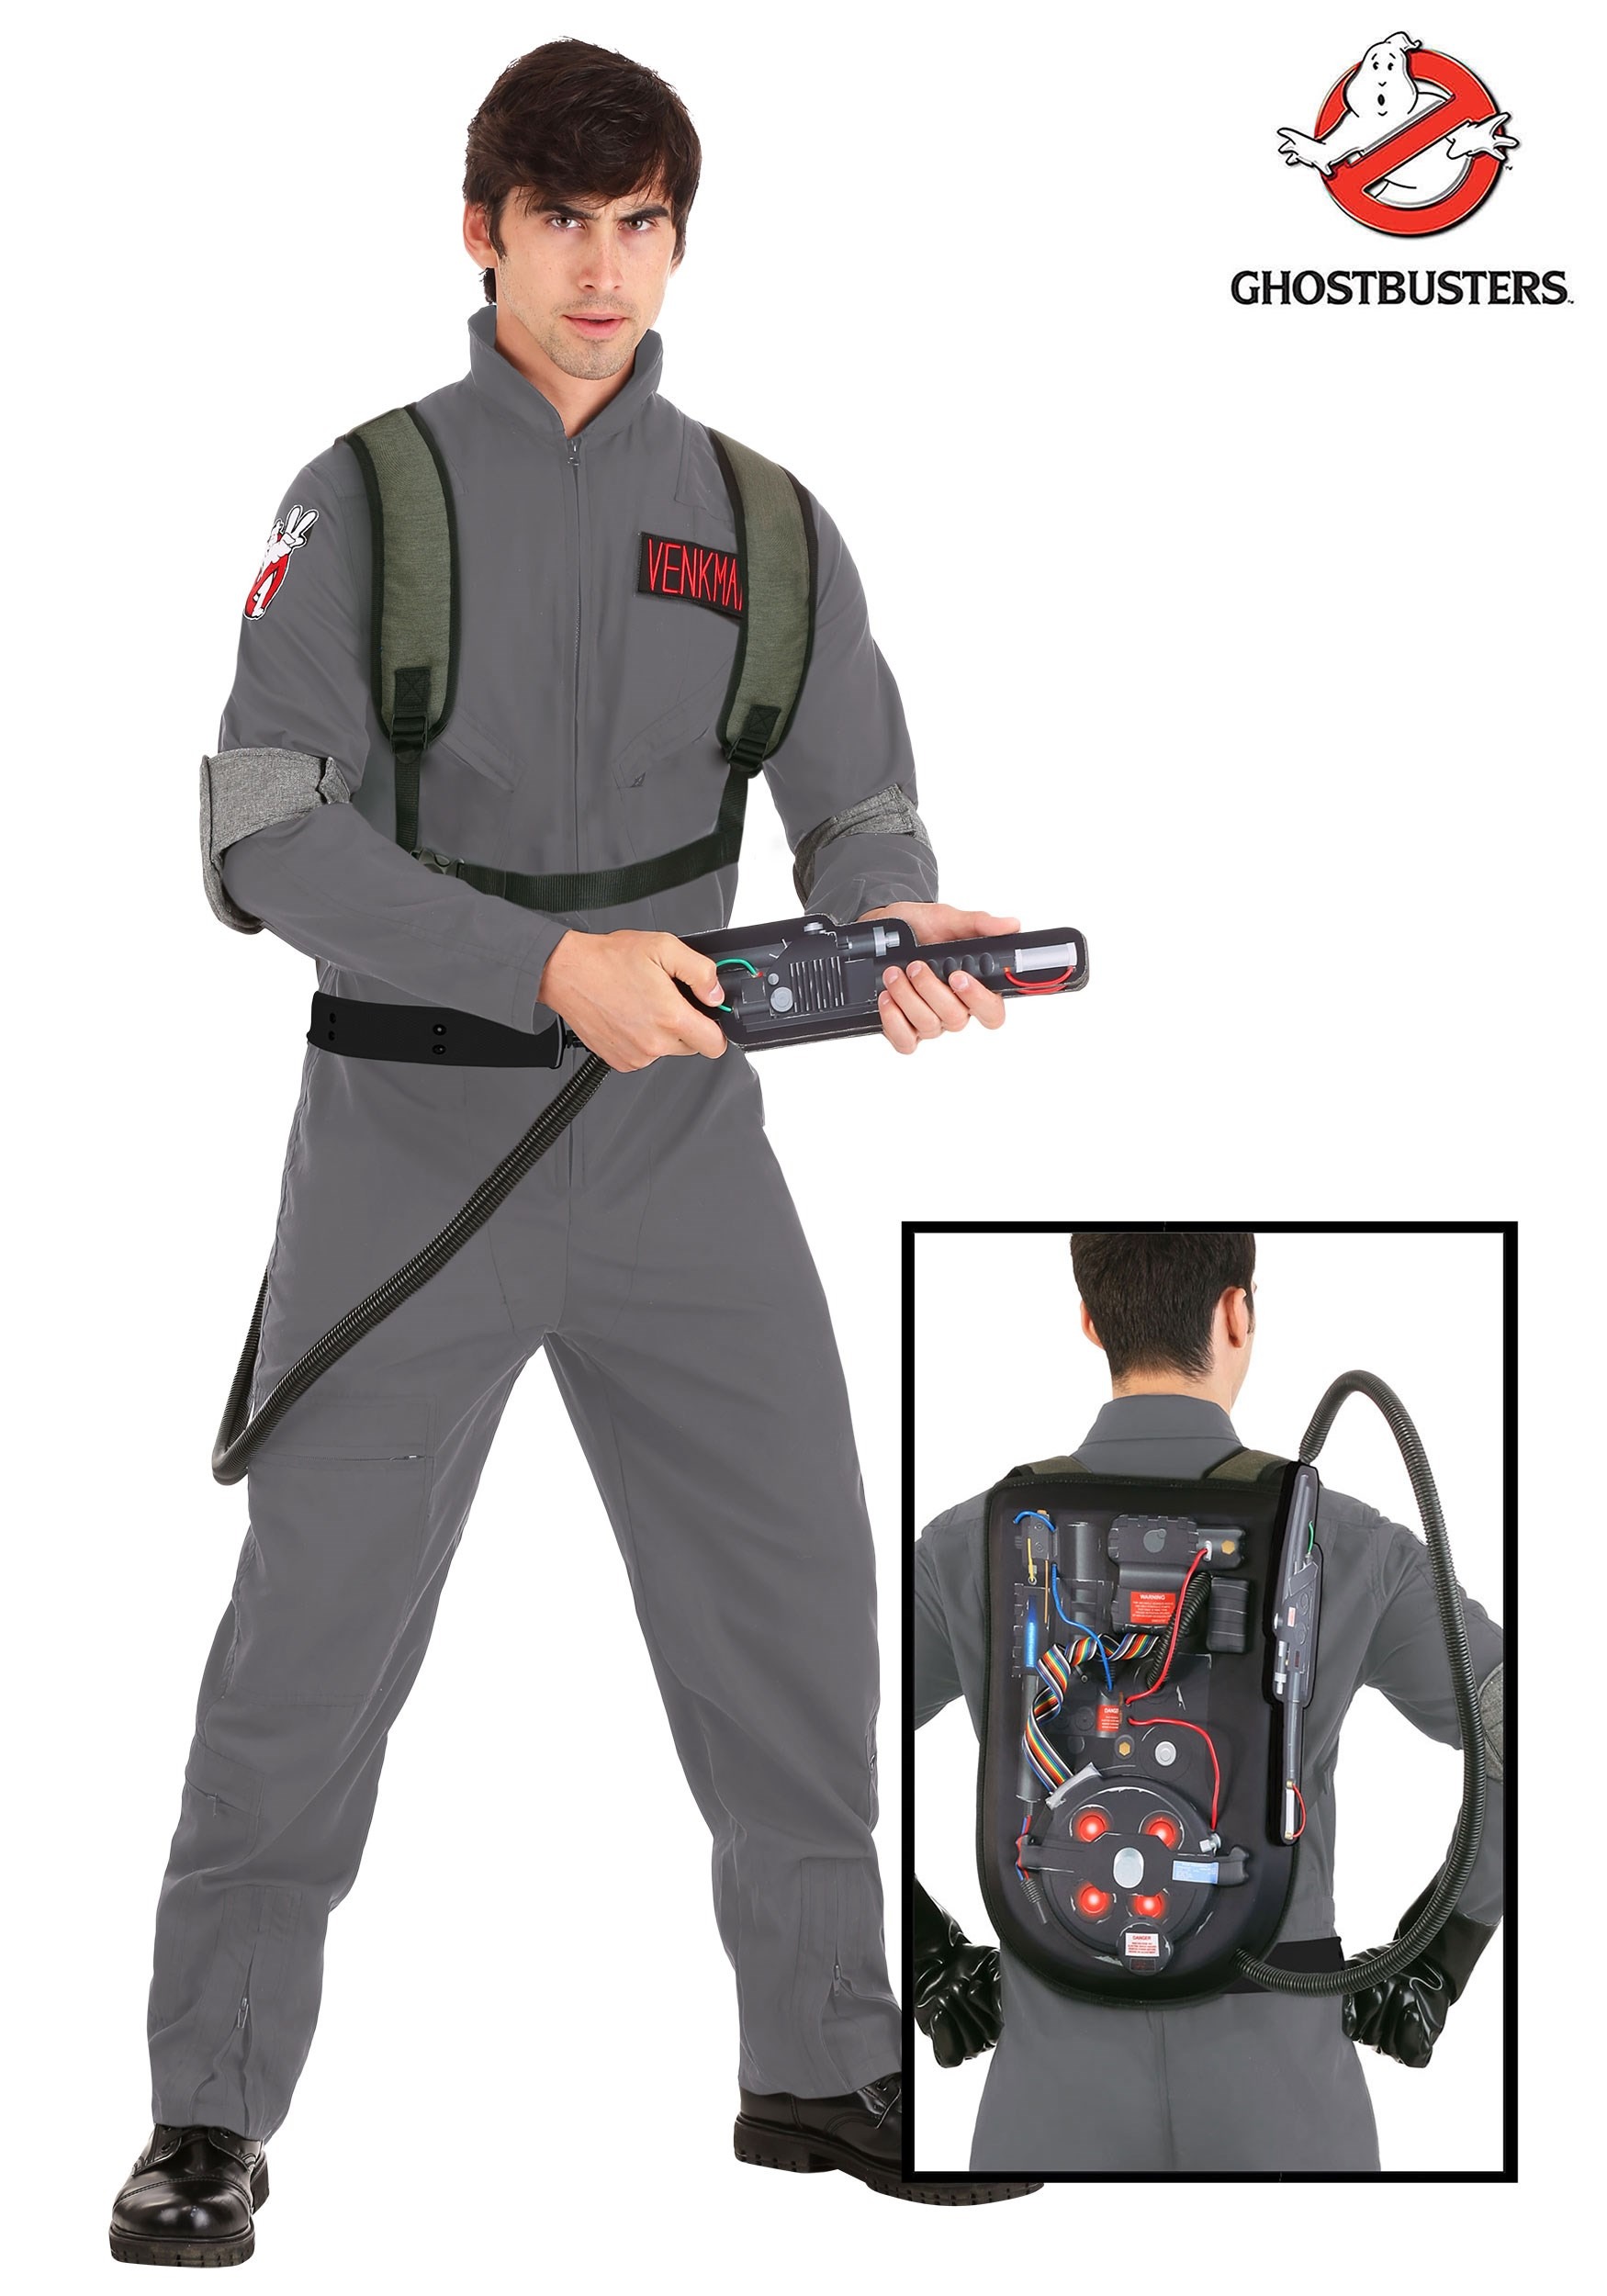 Ghostbusters 2: Men’s Plus Size Cosplay Costume